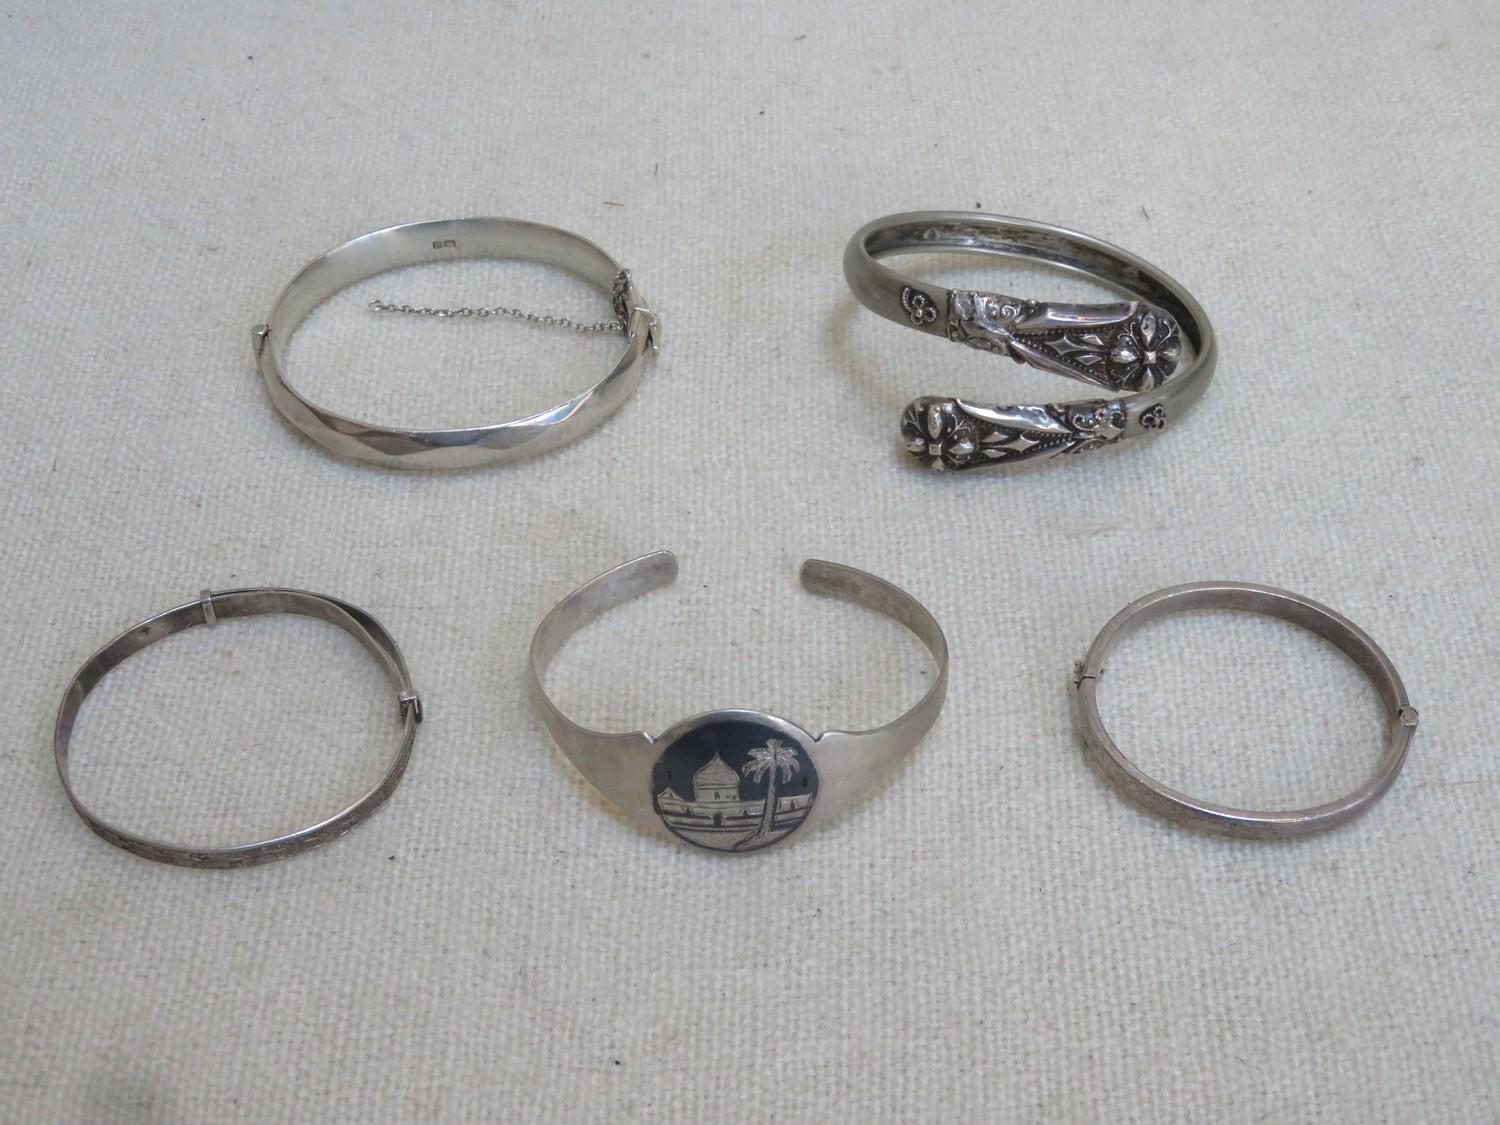 Parcel of various Silver Bangles, various styles. Weight Approx. 89G